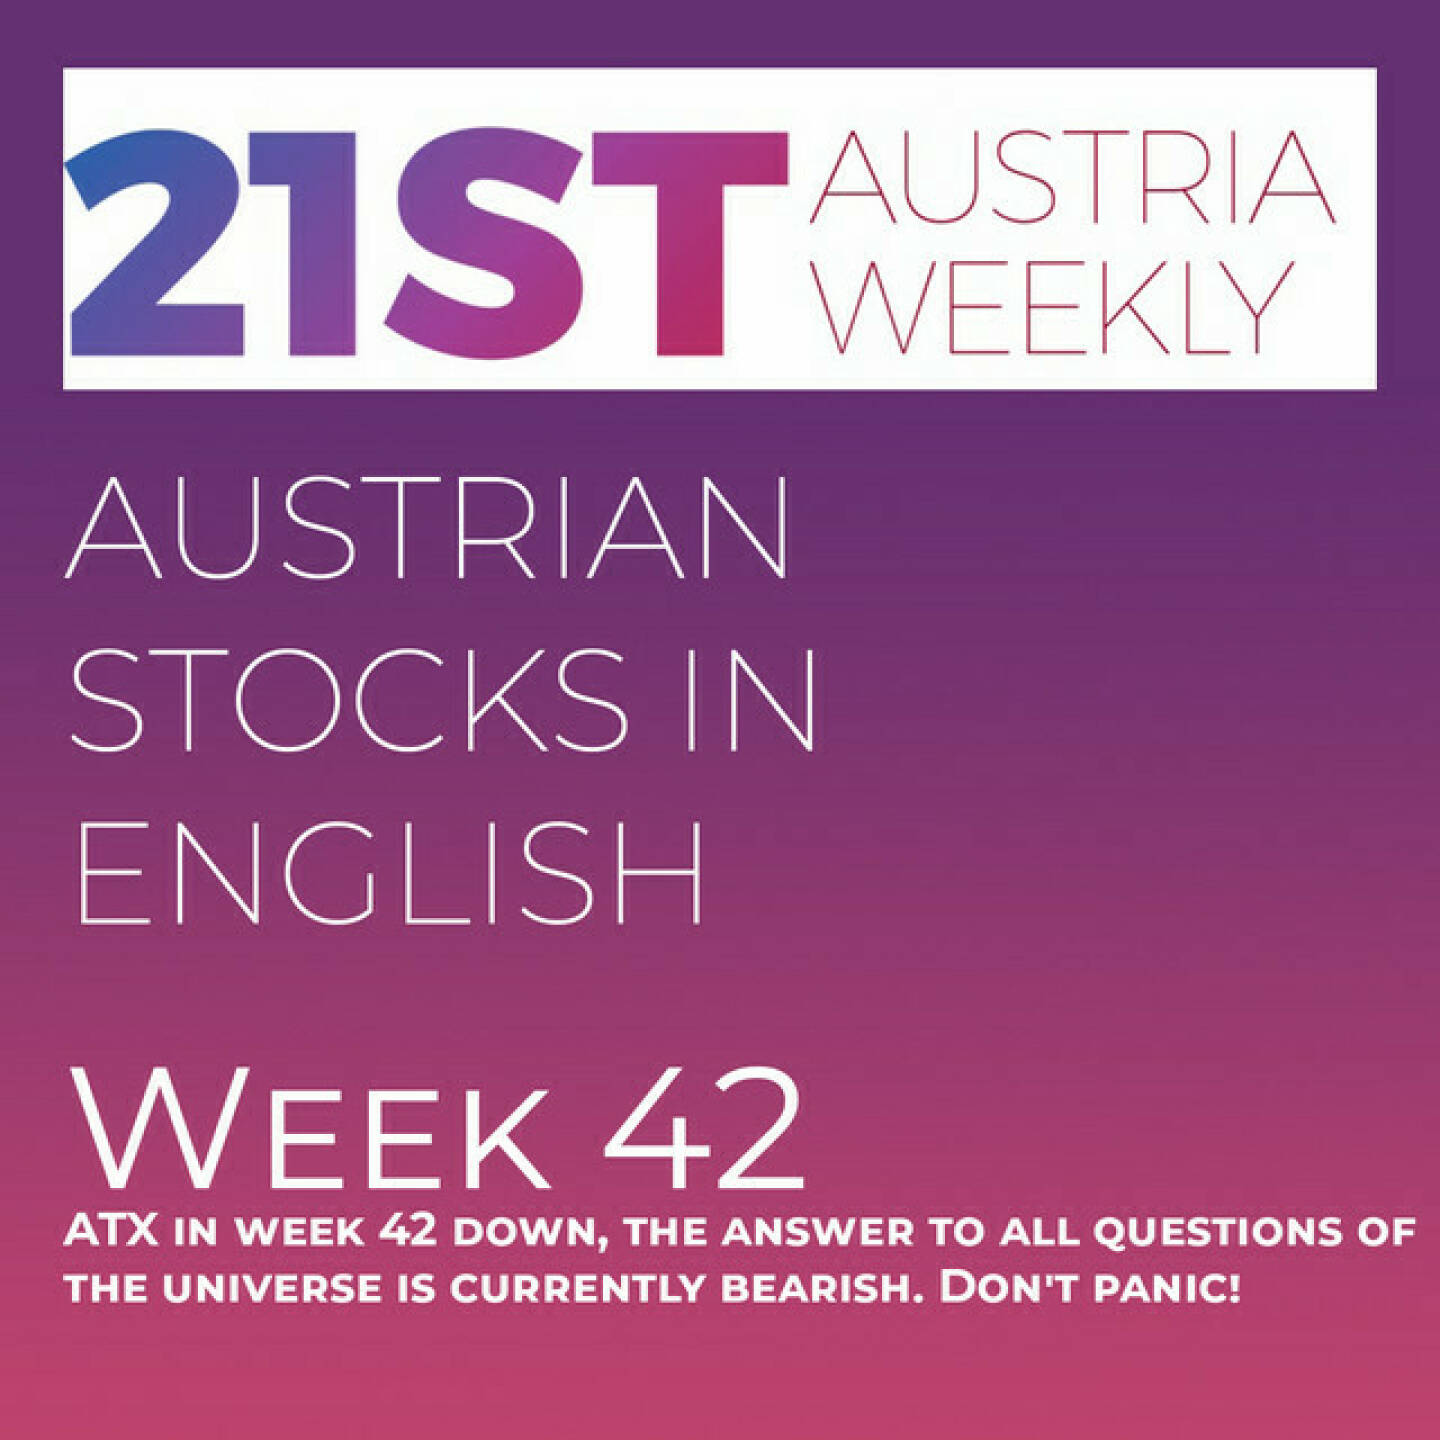 https://open.spotify.com/episode/1TlC2WChIvqf4X2IFrFKng
Austrian Stocks in English: ATX in week 42 down, the answer to all questions of the universe is currently bearish. Don't panic! - <p>Welcome  to &#34;Austrian Stocks in English - presented by Palfinger&#34;, the english spoken weekly Summary for the Austrian Stock Market,  positioned every Sunday in the mostly german languaged Podcast &#34;Audio-CD.at Indie Podcasts&#34;- Wiener Börse, Sport Musik und Mehr“ .<br/><br/>The following script ist based on our 21st Austria weekly and Week 42 as the answer of all questions of the Universe brought the answer &#34;bearish&#34;.ATX TR lost 3.6 percent to 6710 points. News came from Wolftank, Wolford, Marinomed, Bawag, Kapsch TrafficCom, A1 Telekom Austria, Andritz (2), voestalpine, FACC, Immofinanz, RBI, ams Osram, Rosenbauer, spoken by the absolutely smart Alison.<br/><br/><a href=https://boerse-social.com/21staustria target=_blank>https://boerse-social.com/21staustria</a><br/><br/>Please rate my Podcast on Apple Podcasts (or Spotify): <a href=https://podcasts.apple.com/at/podcast/audio-cd-at-indie-podcasts-wiener-boerse-sport-musik-und-mehr/id1484919130 target=_blank>https://podcasts.apple.com/at/podcast/audio-cd-at-indie-podcasts-wiener-boerse-sport-musik-und-mehr/id1484919130</a> .And please spread the word : <a href=https://www.boerse-social.com/21staustria target=_blank>https://www.boerse-social.com/21staustria</a> - the address to subscribe to the weekly summary as a PDF.</p>